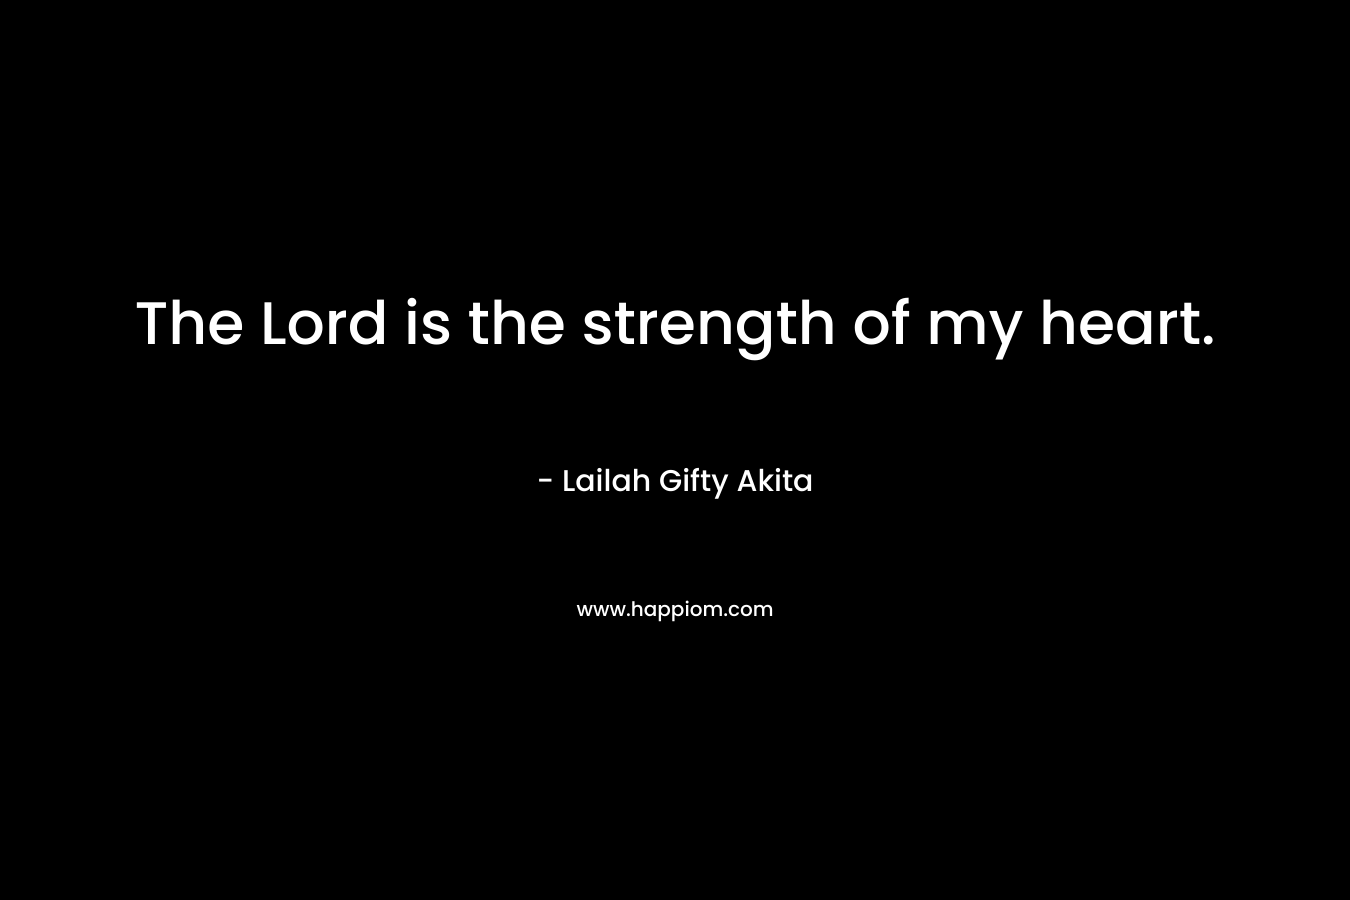 The Lord is the strength of my heart.